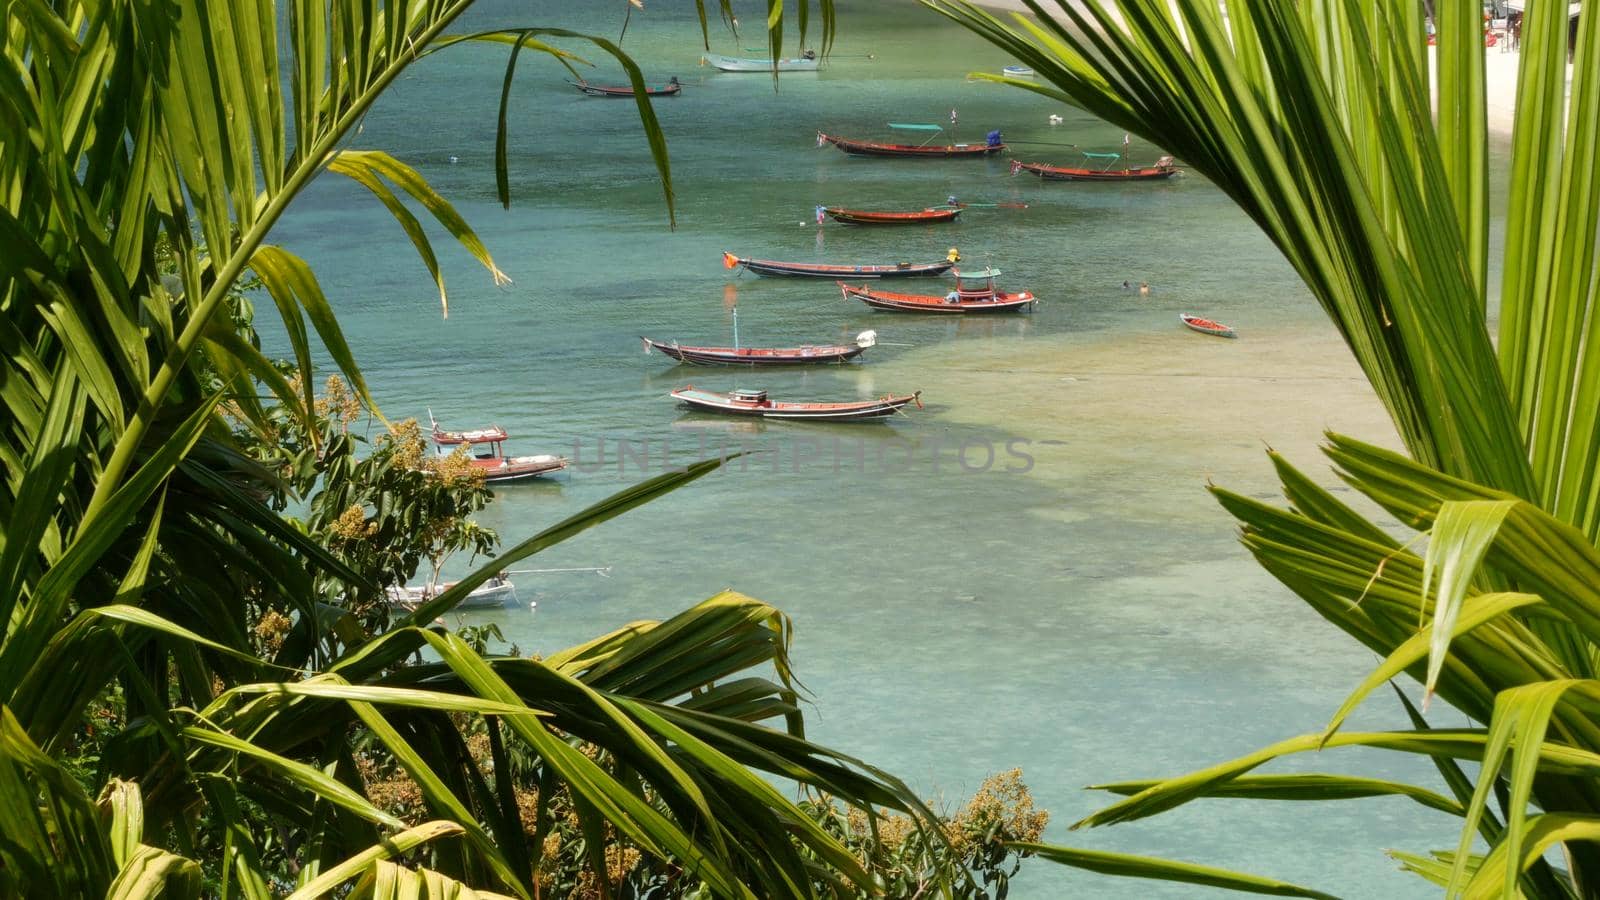 Boats near shore of island. Traditional colorful fishing vessels floating on calm blue water near white sand coast of tropical exotic paradise island. View through green palm leaves. Koh Phangan.